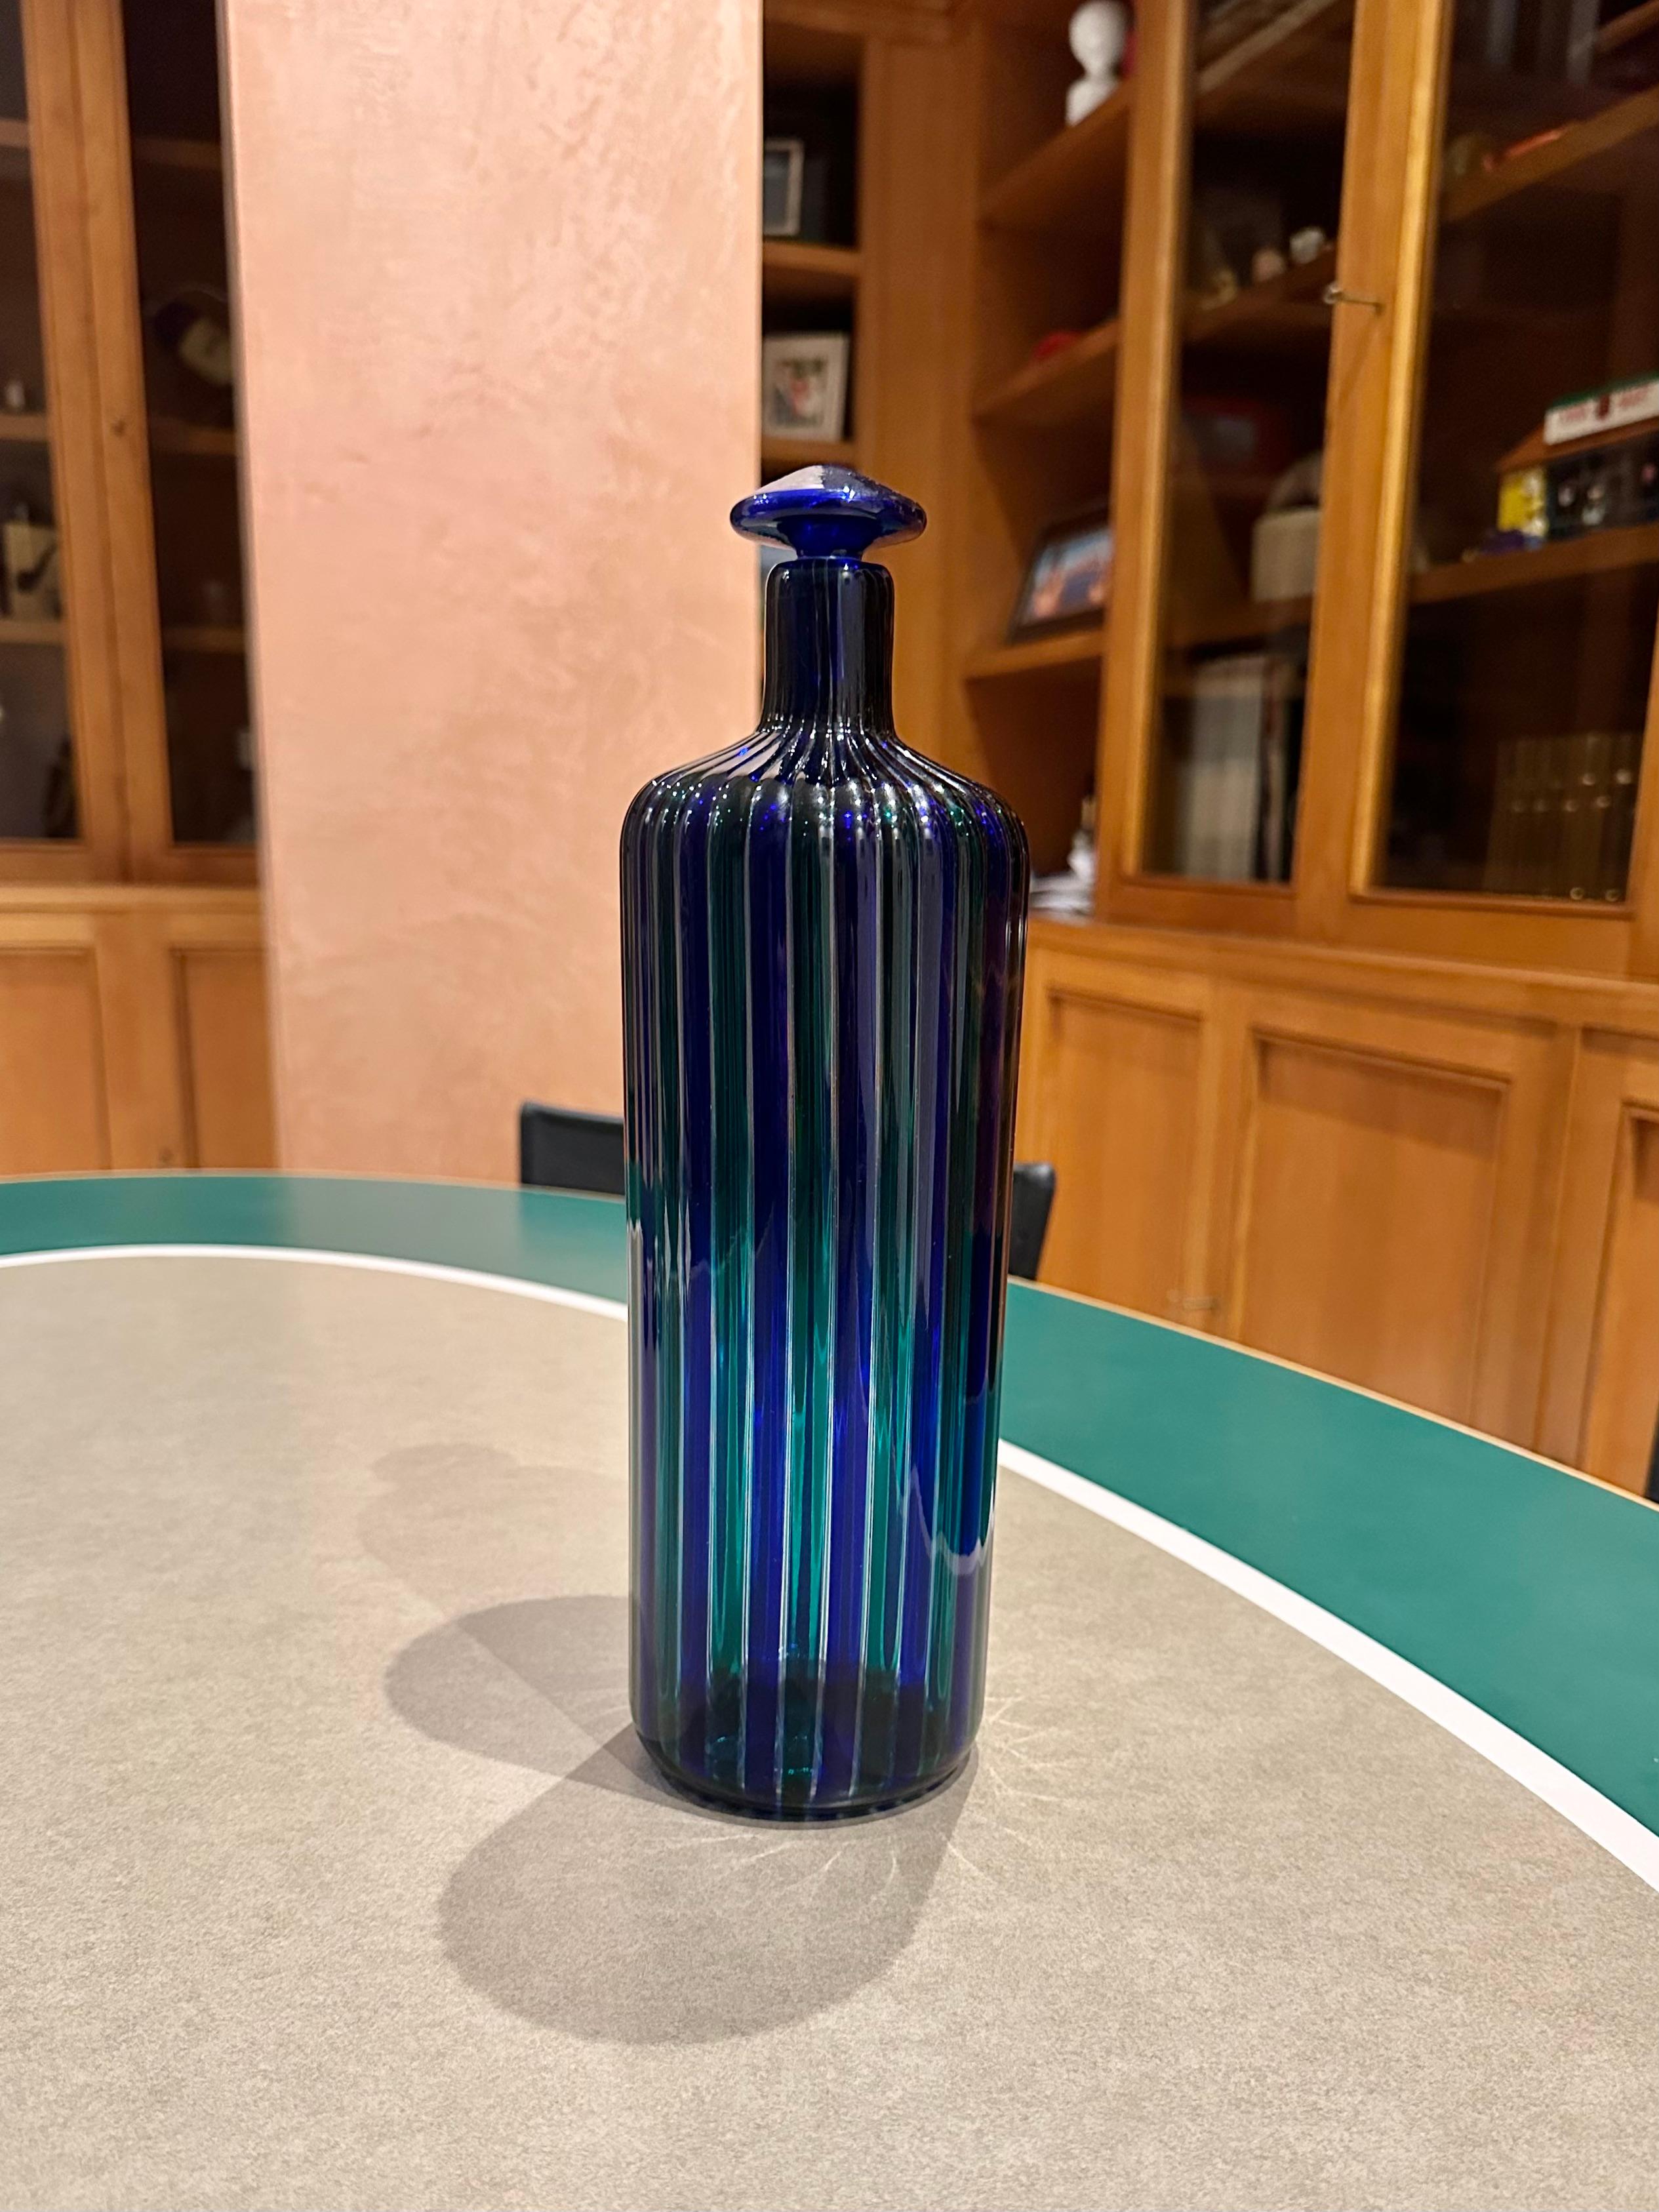 Blue and Green Murano Glass Bottle by Fulvio Bianconi for Venini, Italy 1988 For Sale 4